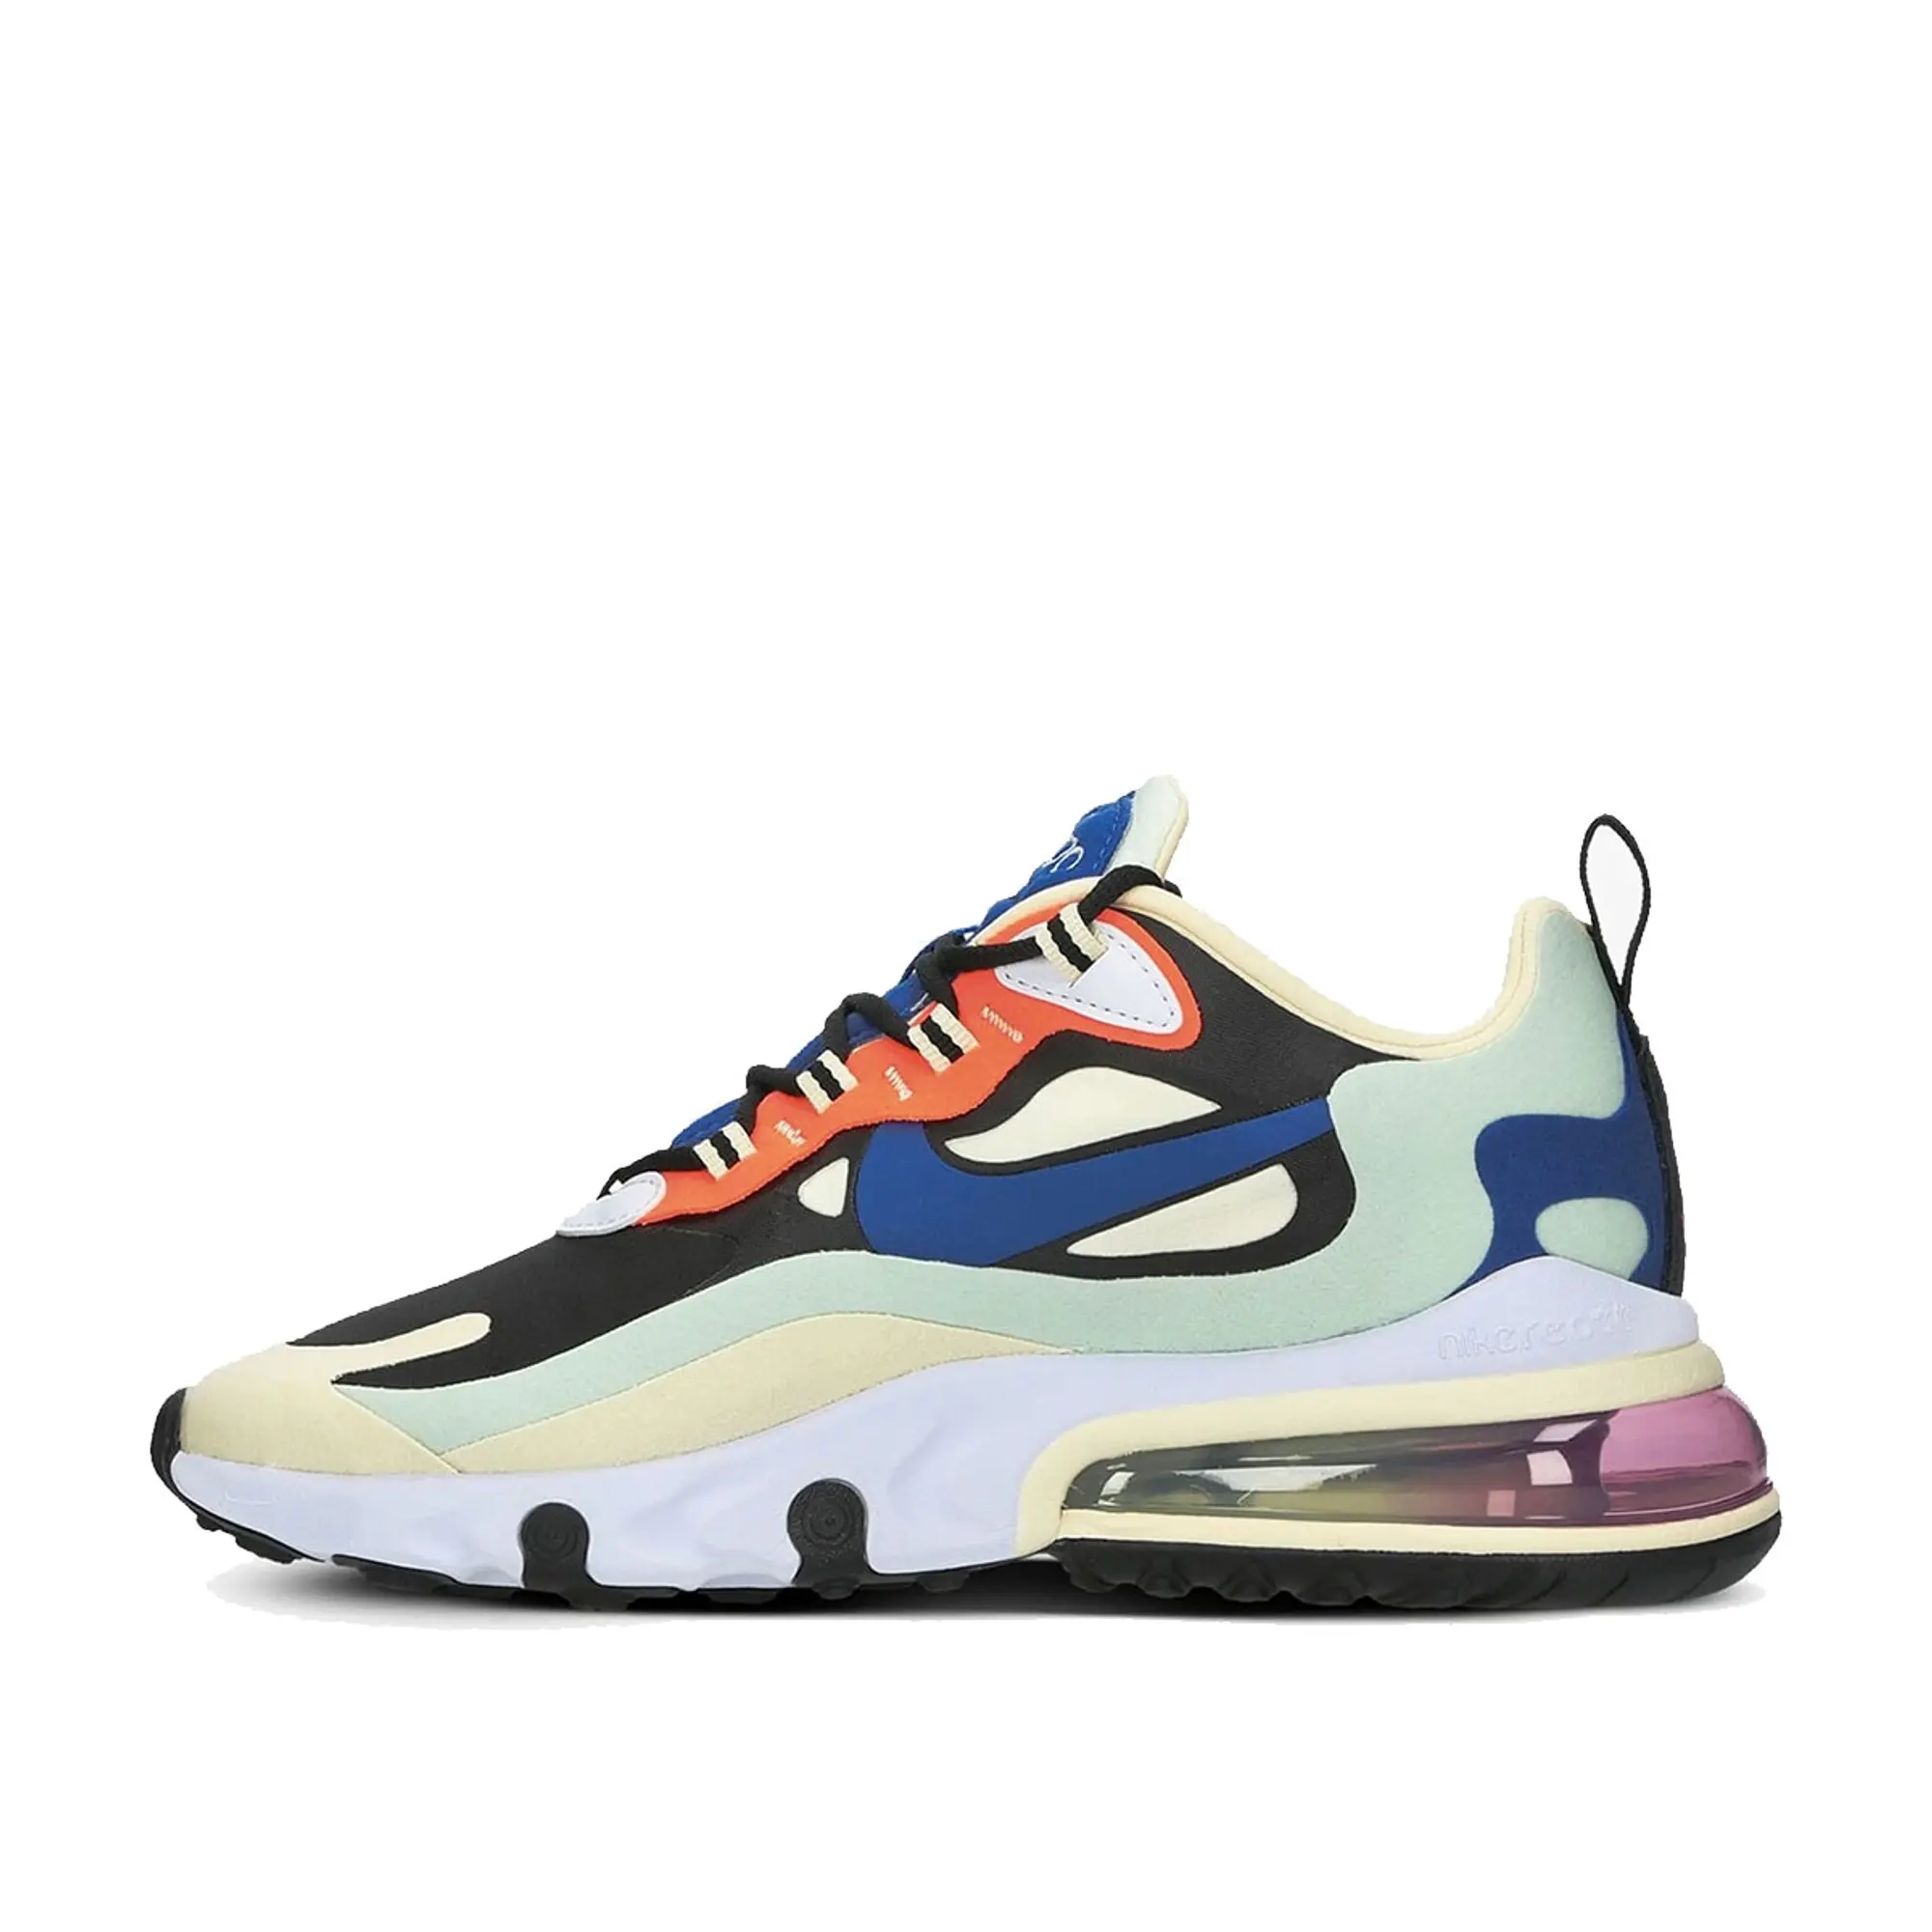 Nike WMNS Air Max 270 React Fossil Pistachio Frost